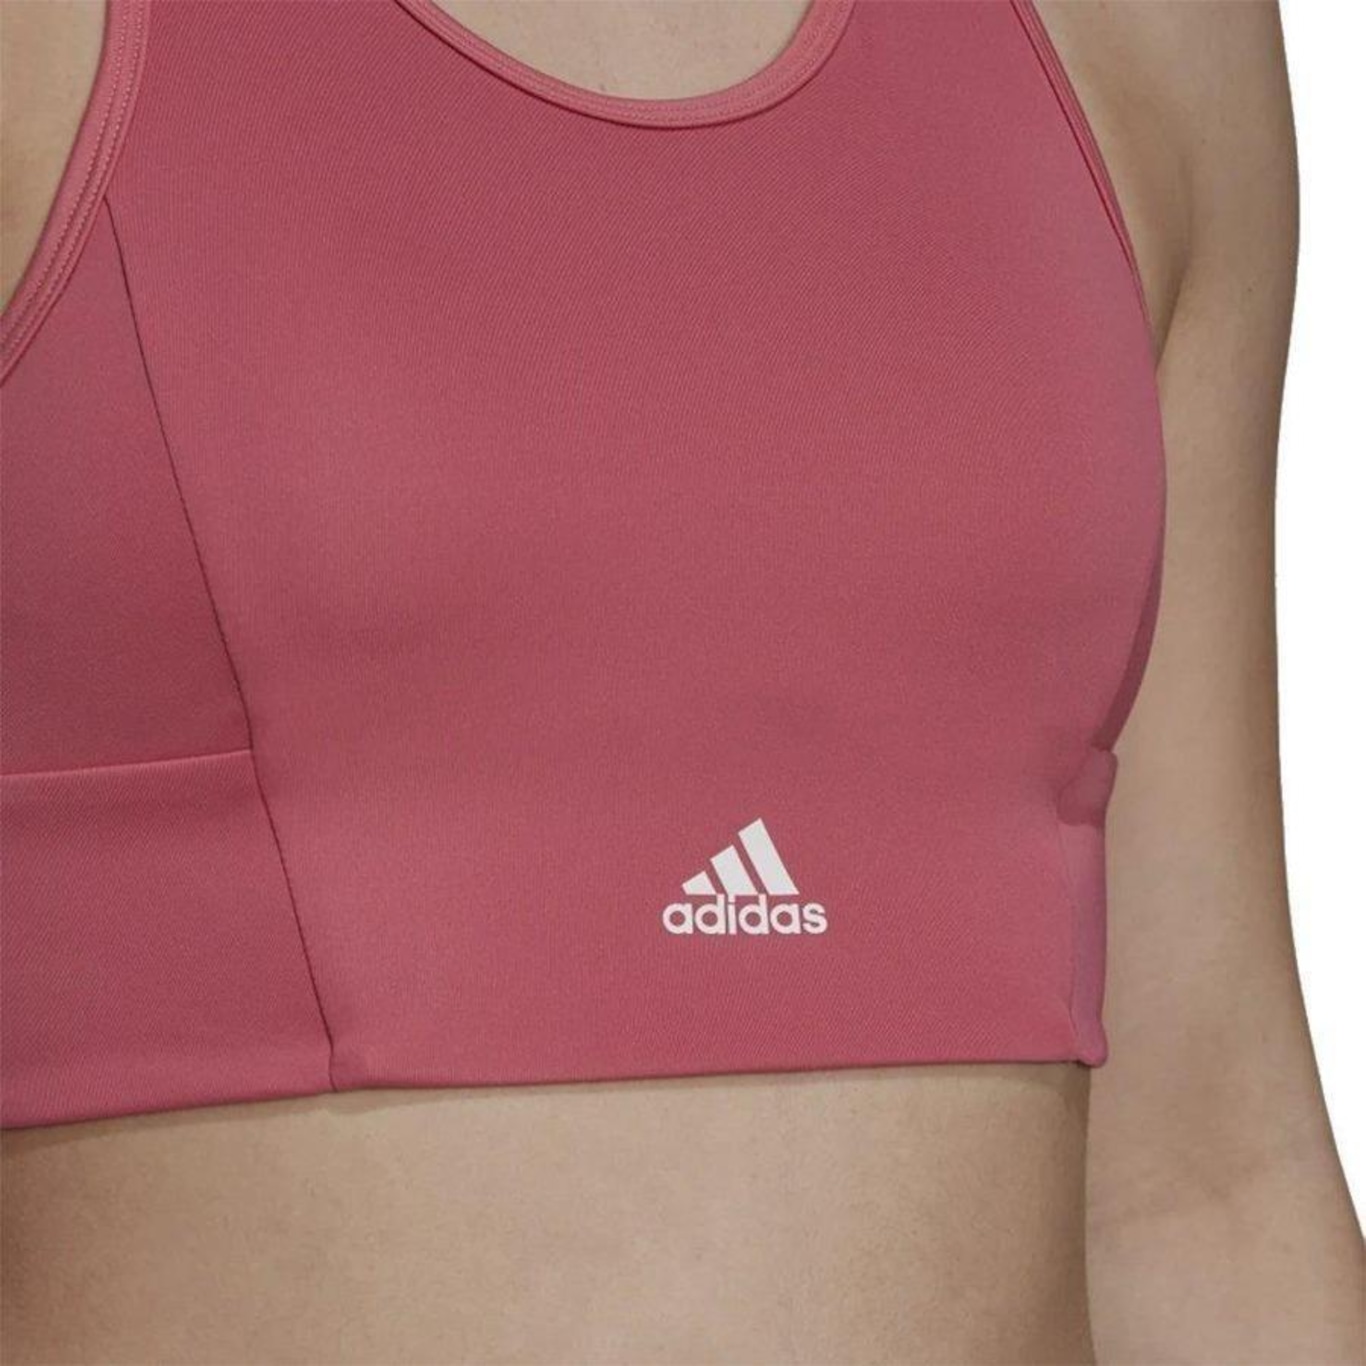 Top Cropped adidas 3 Stripes Padded Sports - Adulto